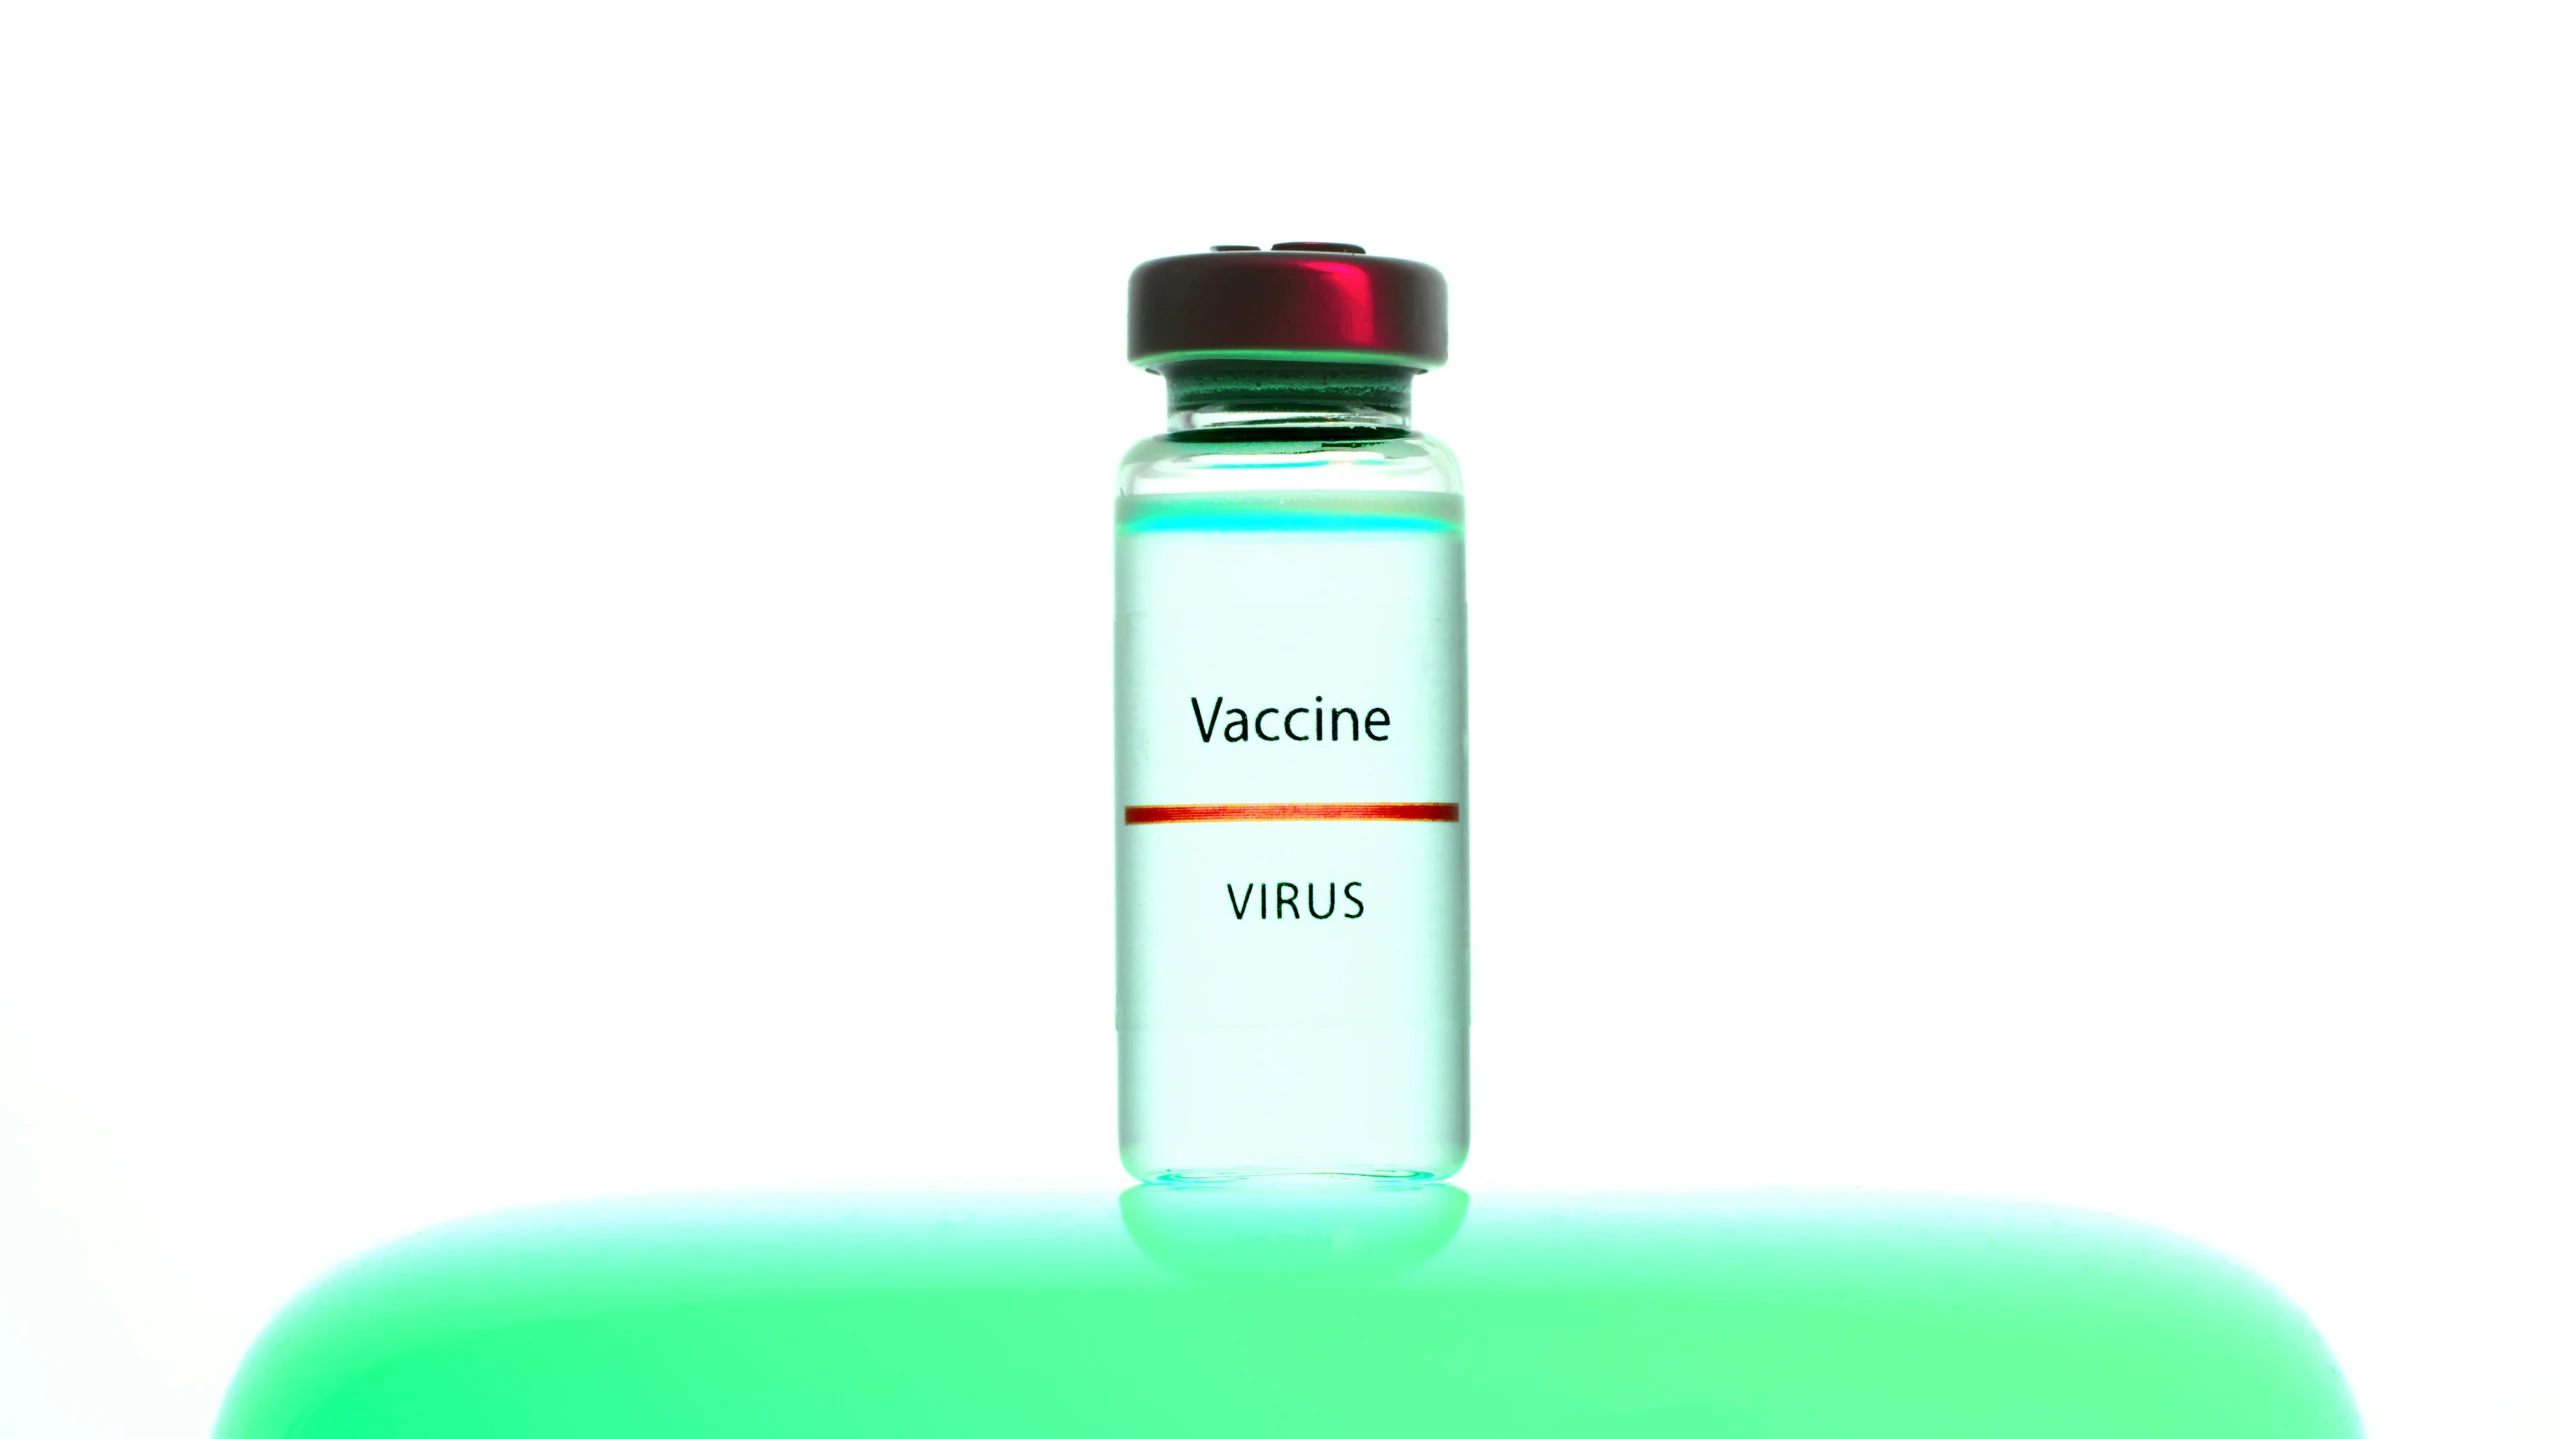 a bottle of vaccine sitting on top of a table, bright microscopic view realism, ƒ/5.6, version 3, may 1 0